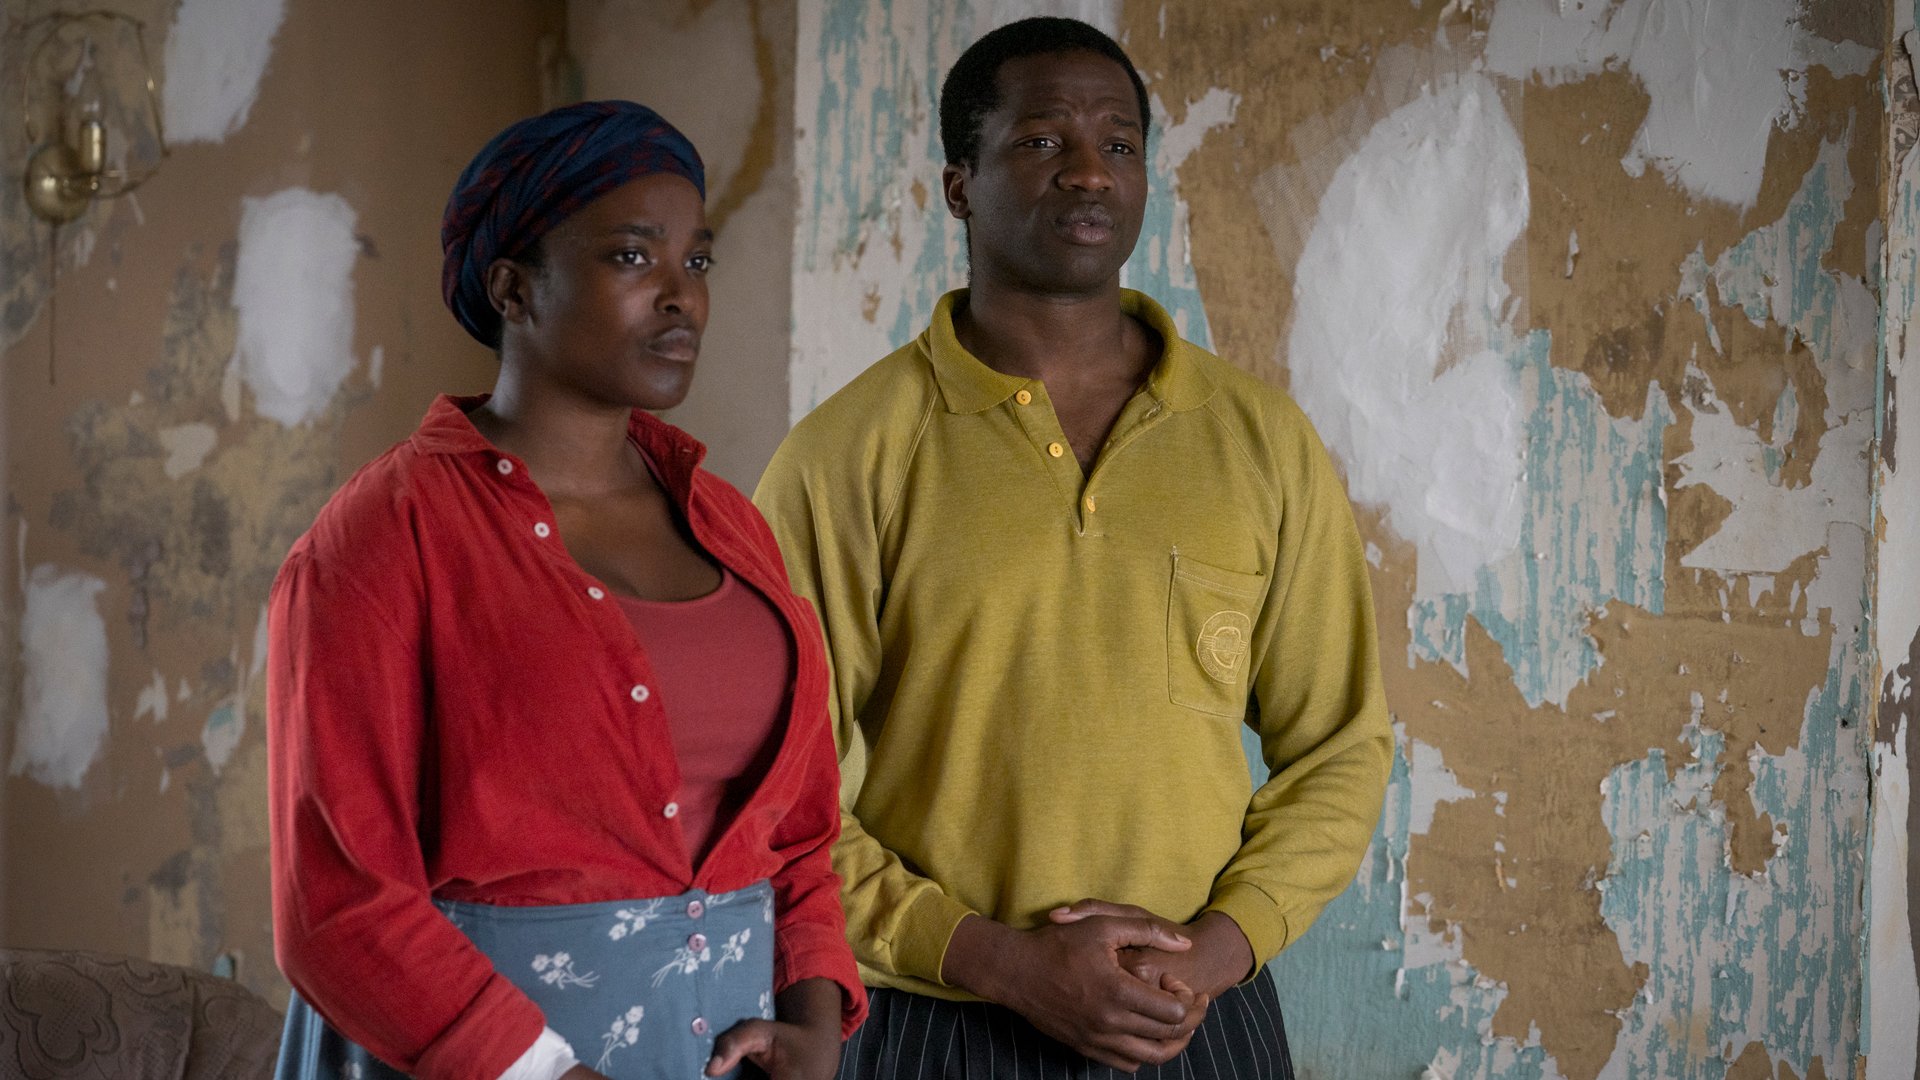 A woman in a red shirt and a man in a yellow shirt stand in a room with dilapidated walls.